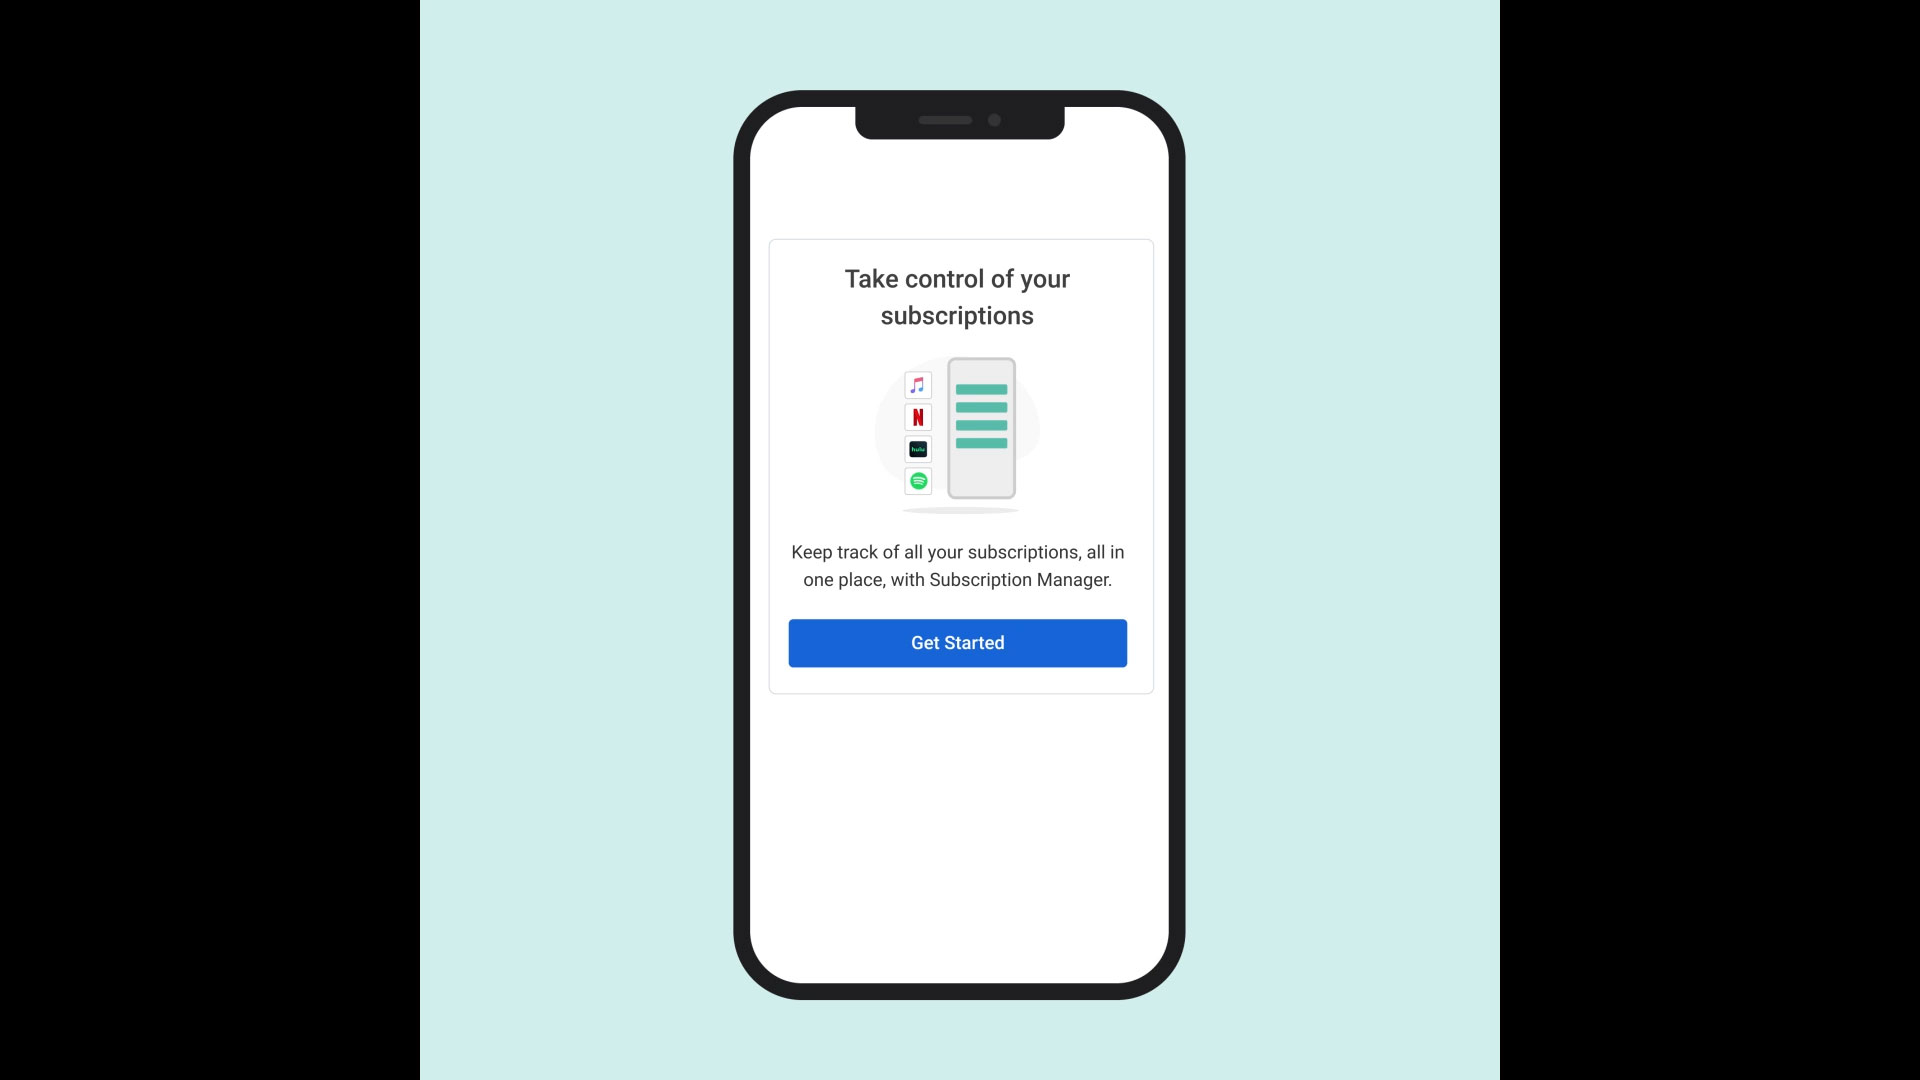 Array's new Subscription Manager, an embeddable, private-label app, helps financial institutions, fintechs, and digital brands attract new consumers and retain existing customers by giving them insight into and control over recurring payments.